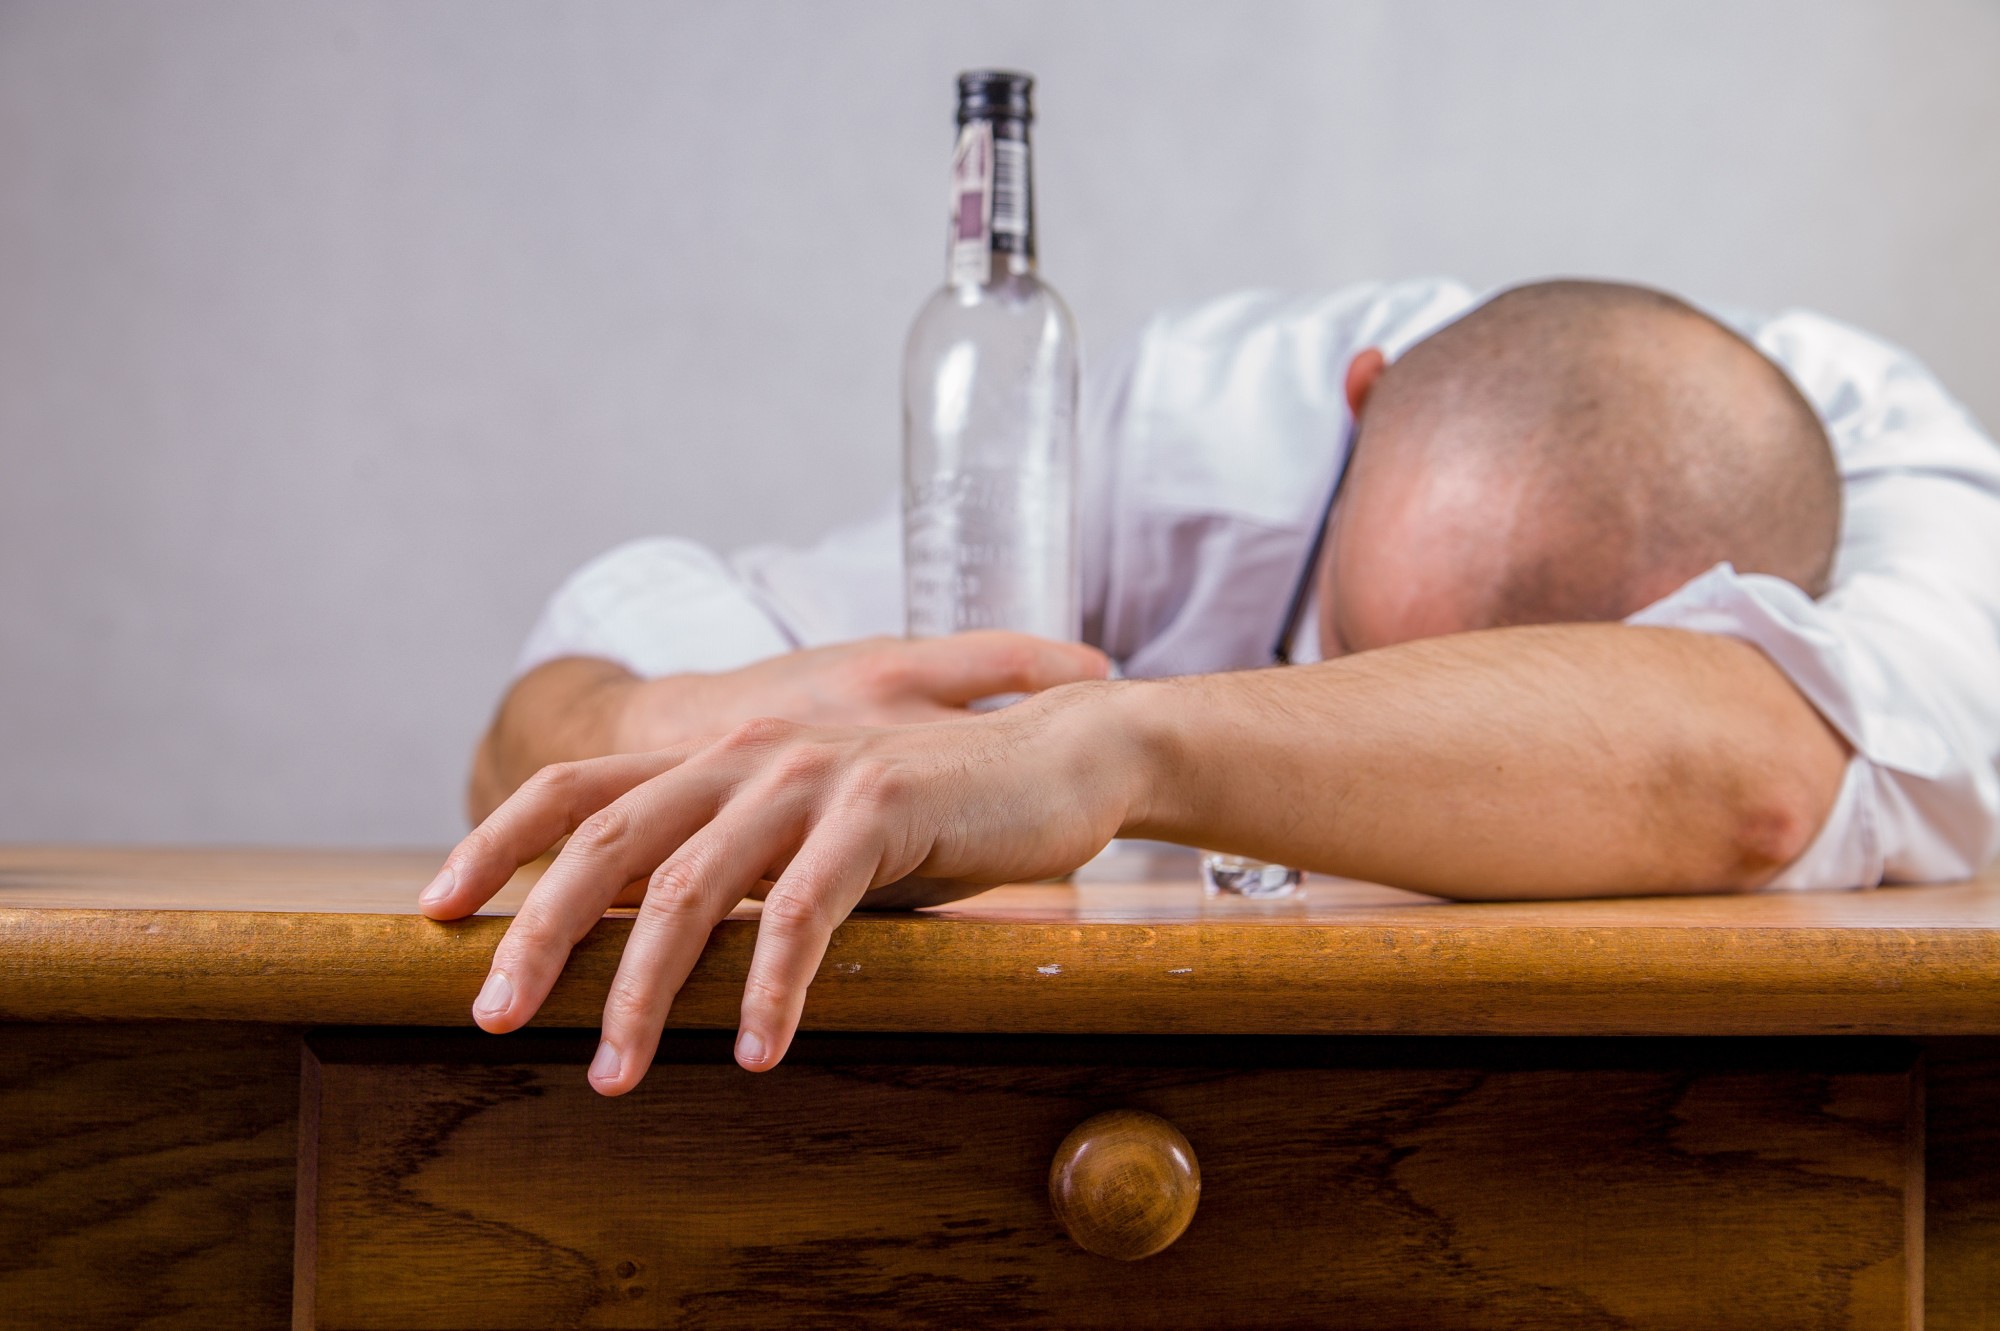 9 Warning Signs You Are an Alcoholic